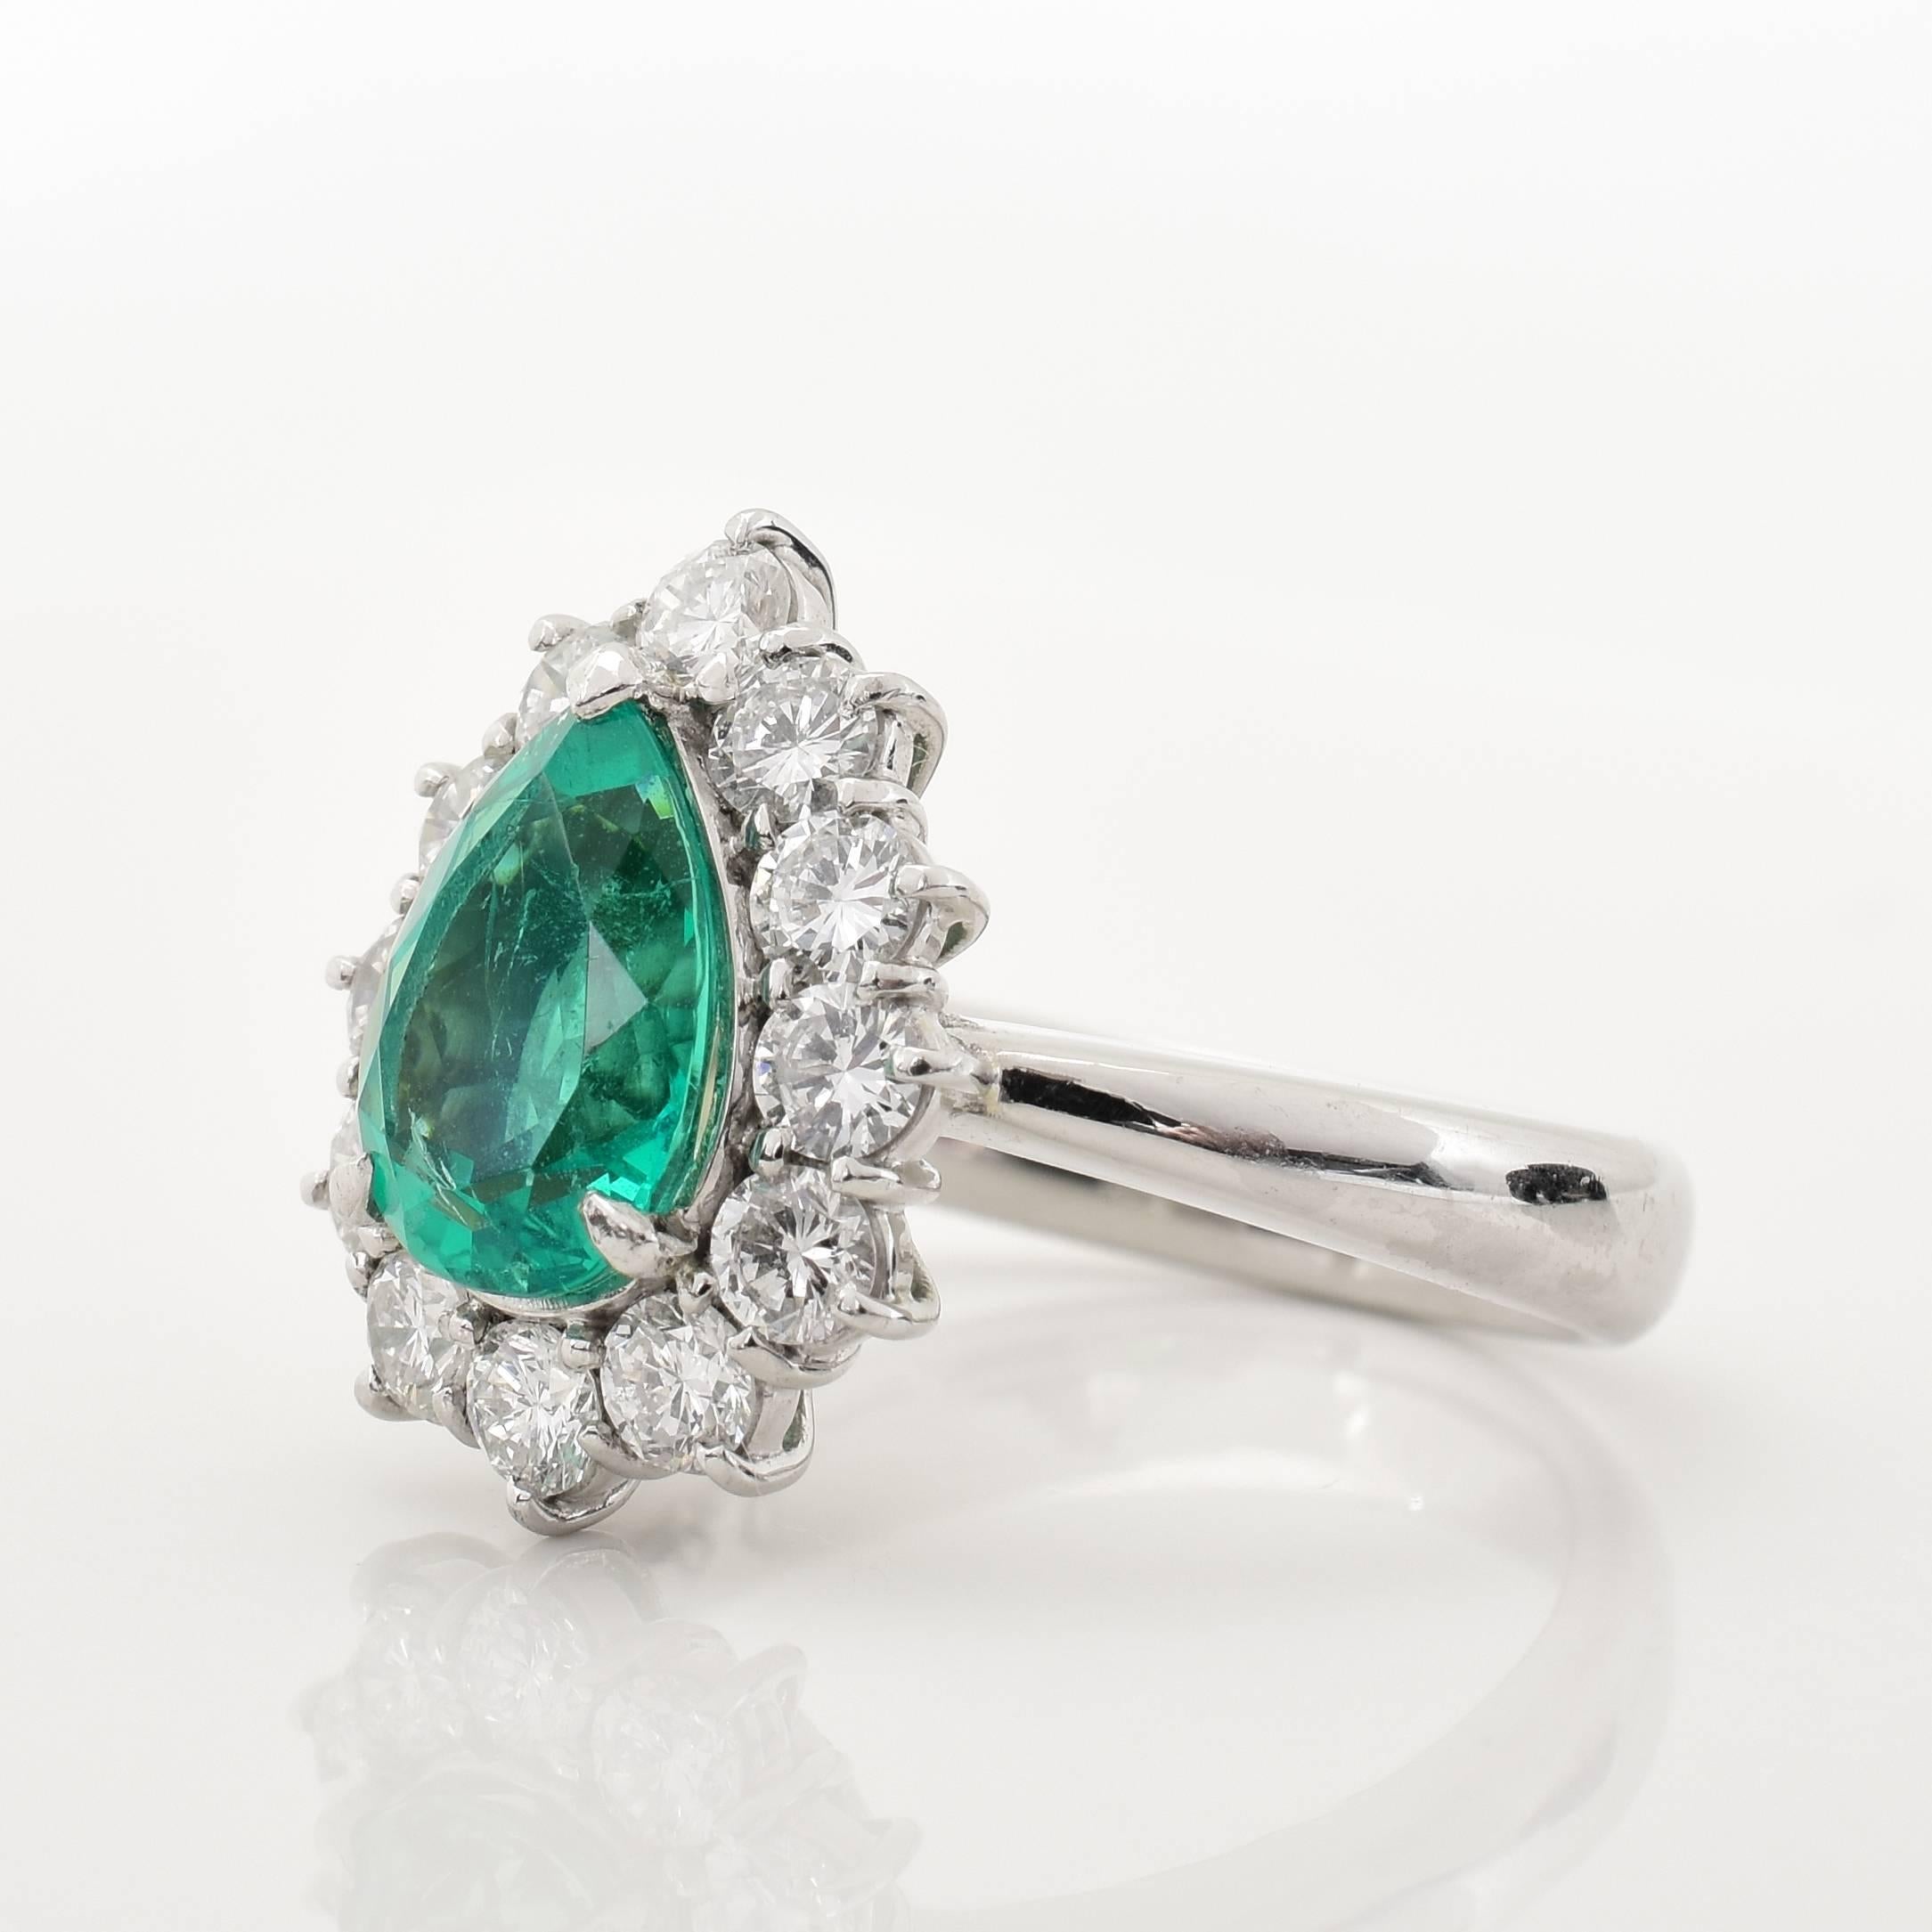 This ring features a 1.62 carat Pear Shape Emerald center stone, surrounded by .95 carats of diamonds, in a platinum mounting.